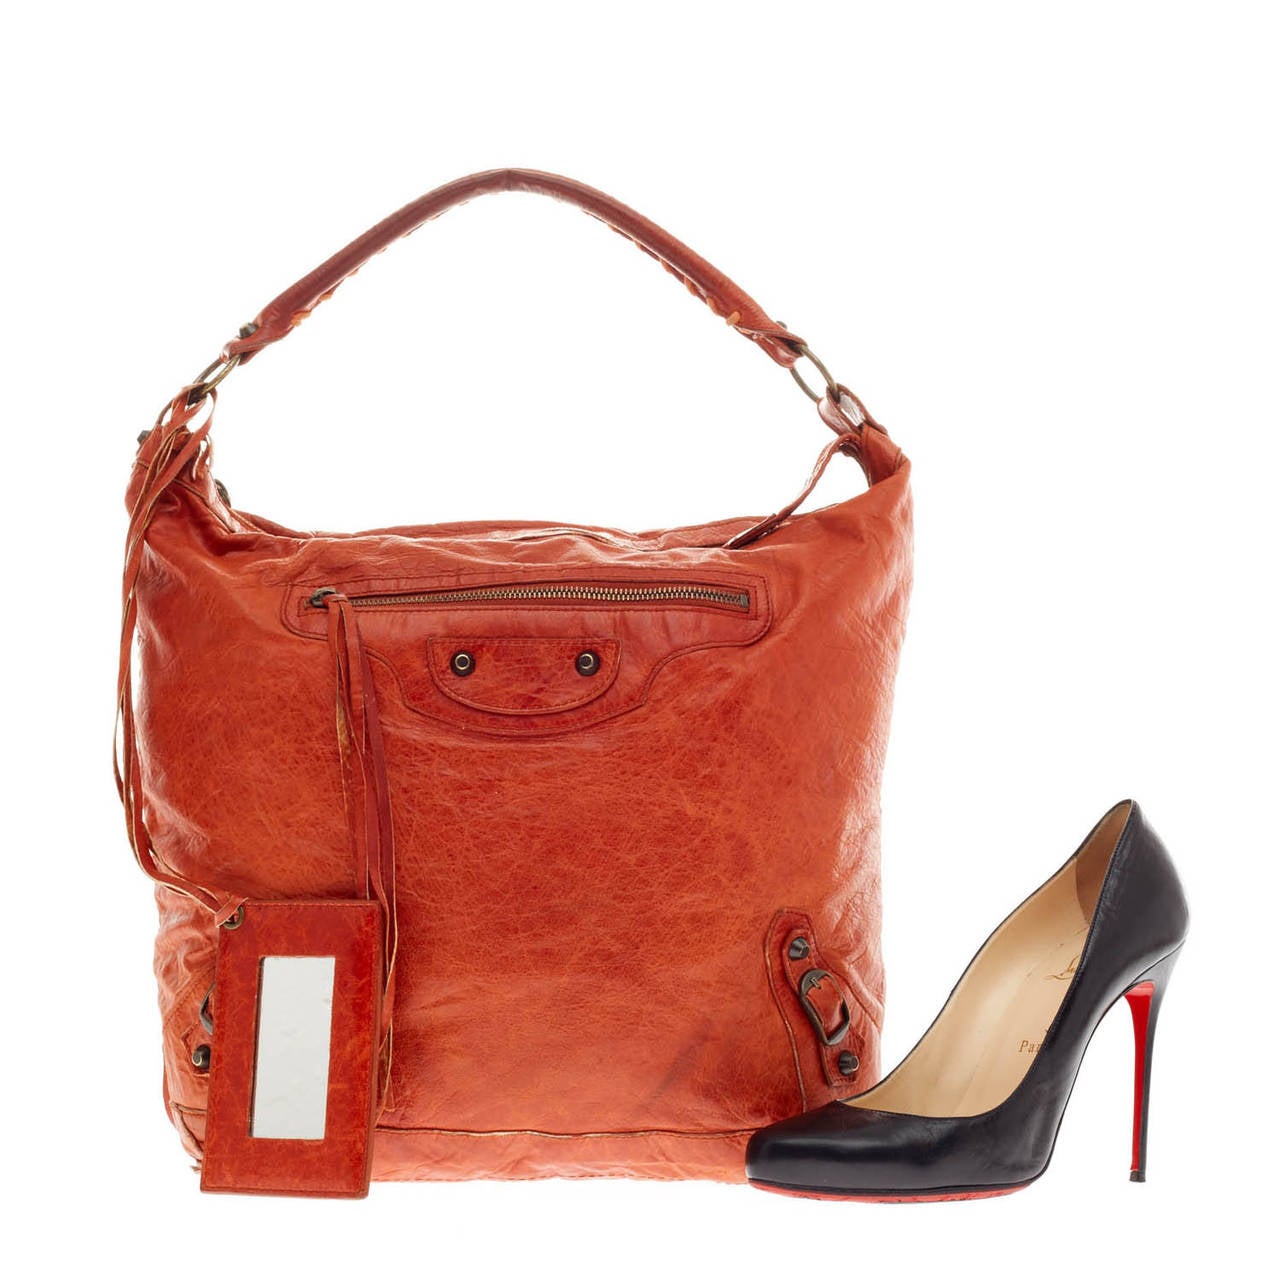 This authentic Balenciaga Day Classic Studs in soft supple red-orange distressed leather is a go-to essential that fits everyday essentials. This spacious hobo is accented with an intertwined braided leather top handle, long fringes on front pocket